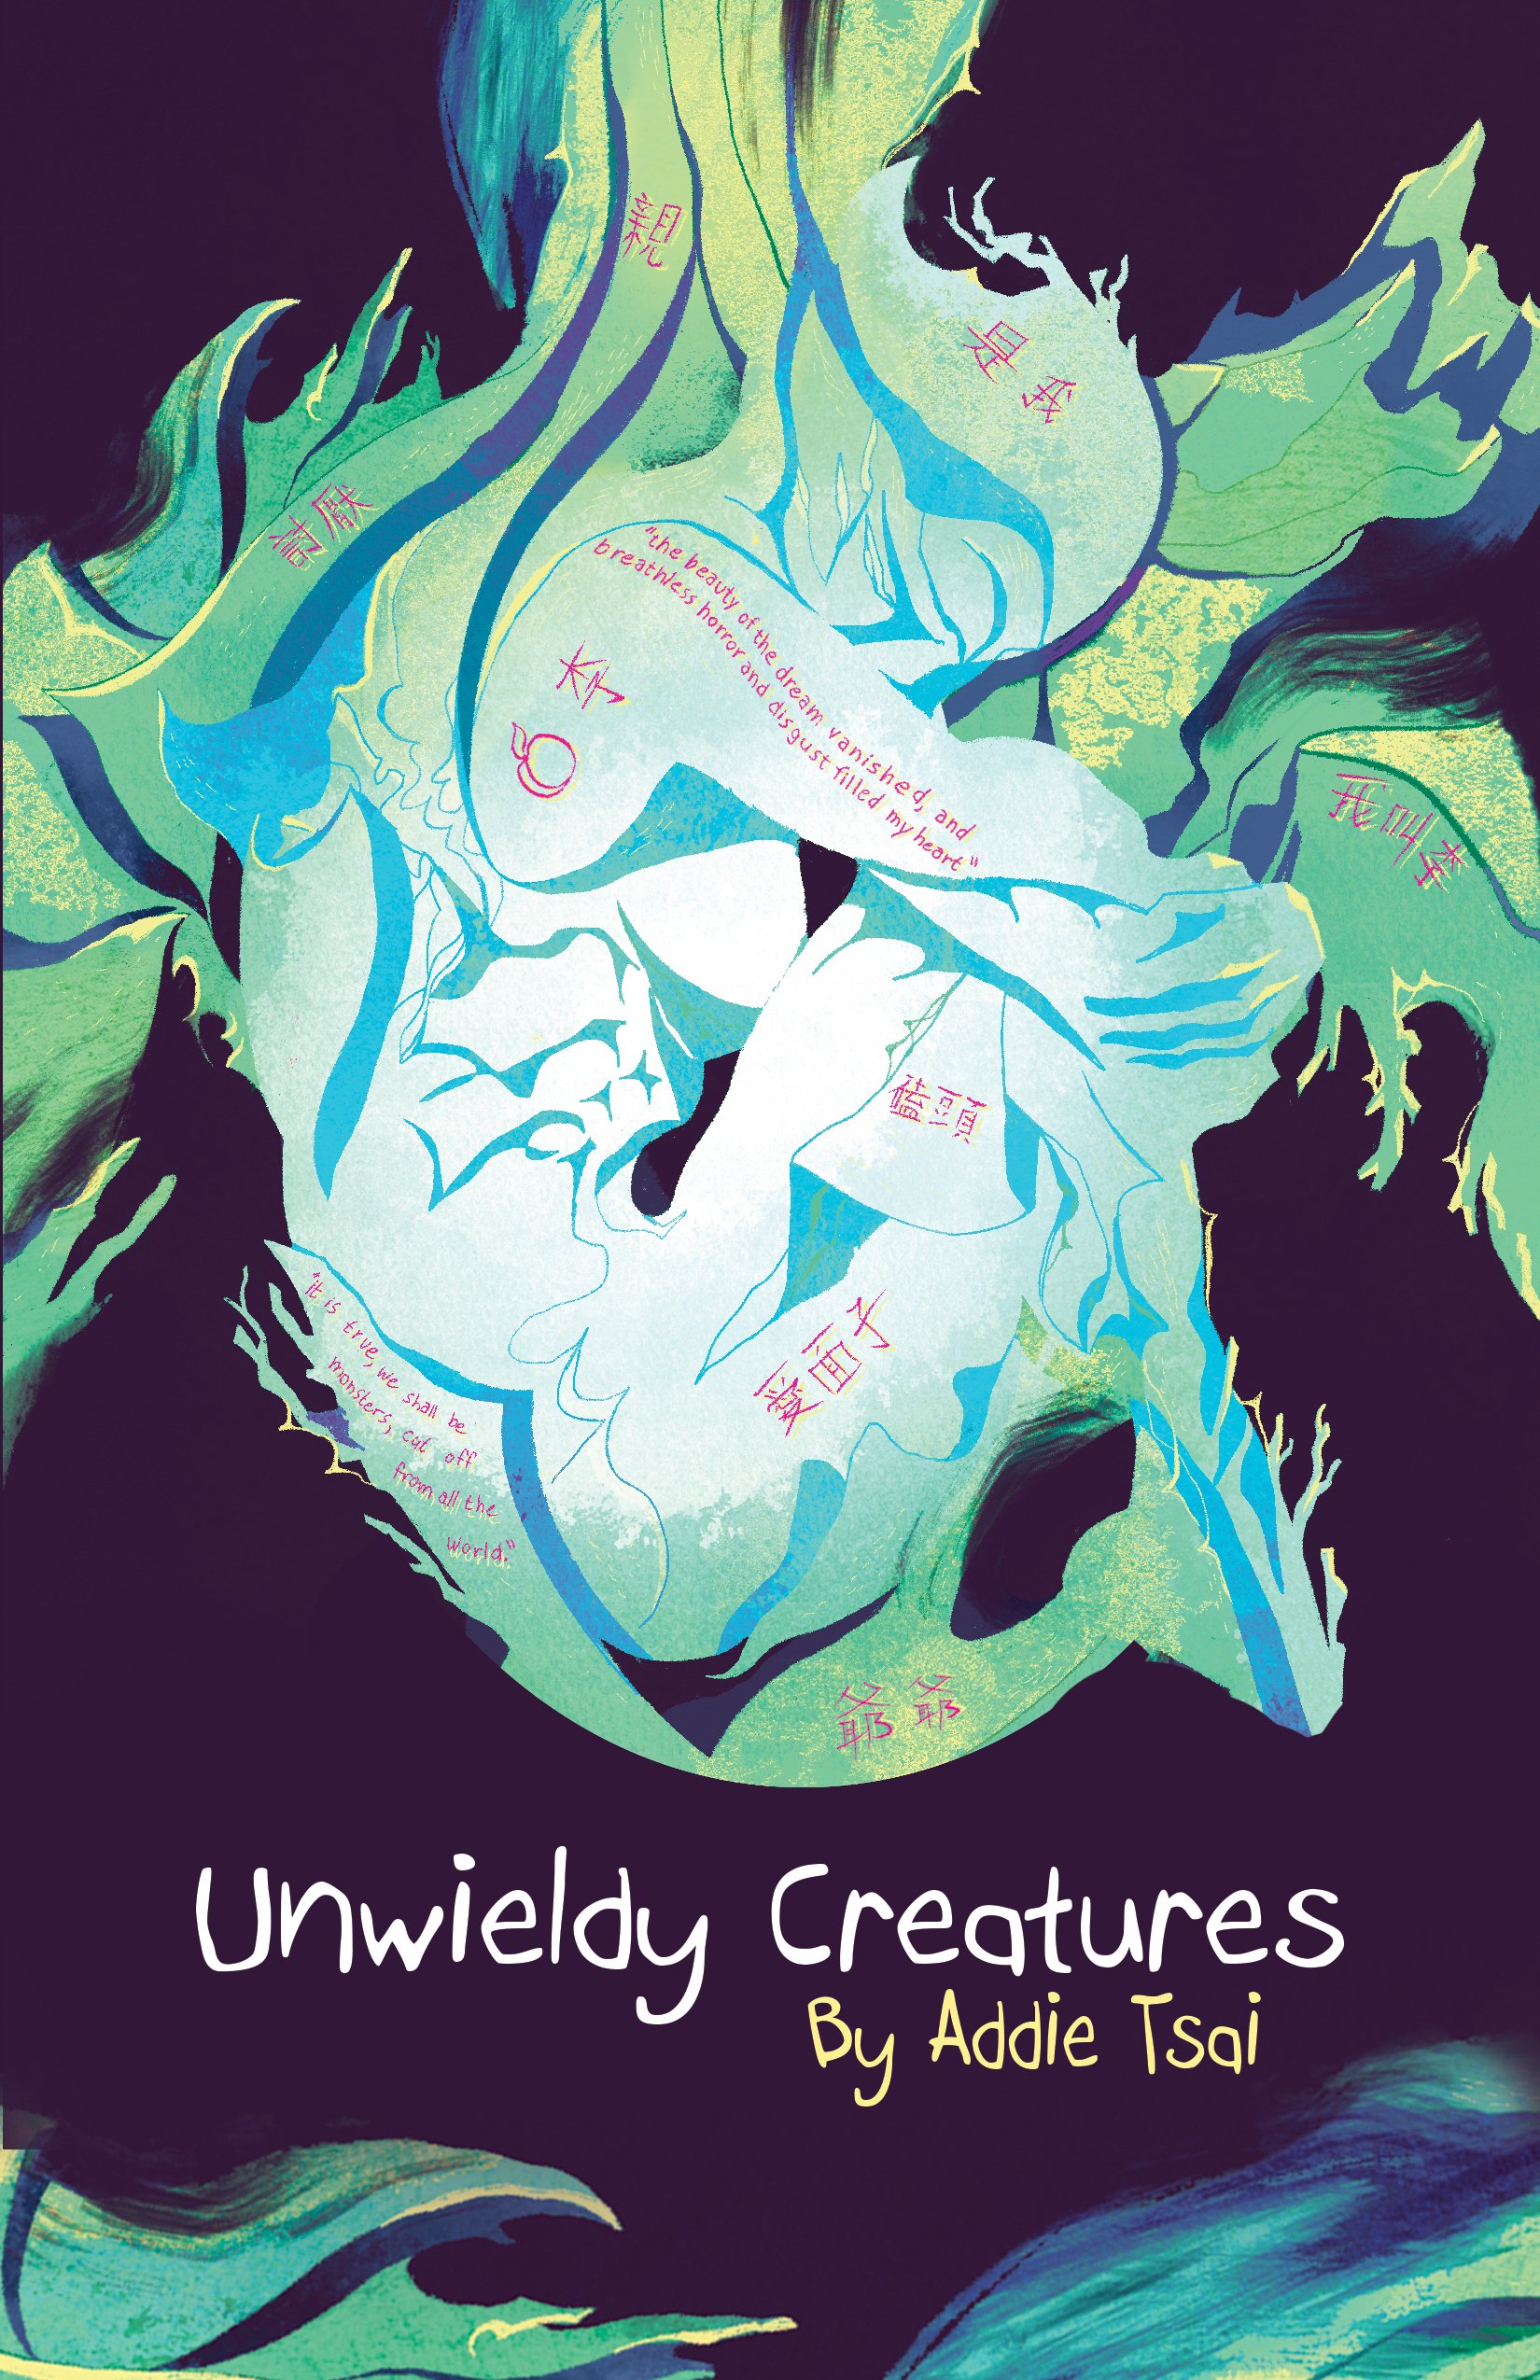 Read This! Excerpt of Addie Tsai’s Unwieldy Creatures image